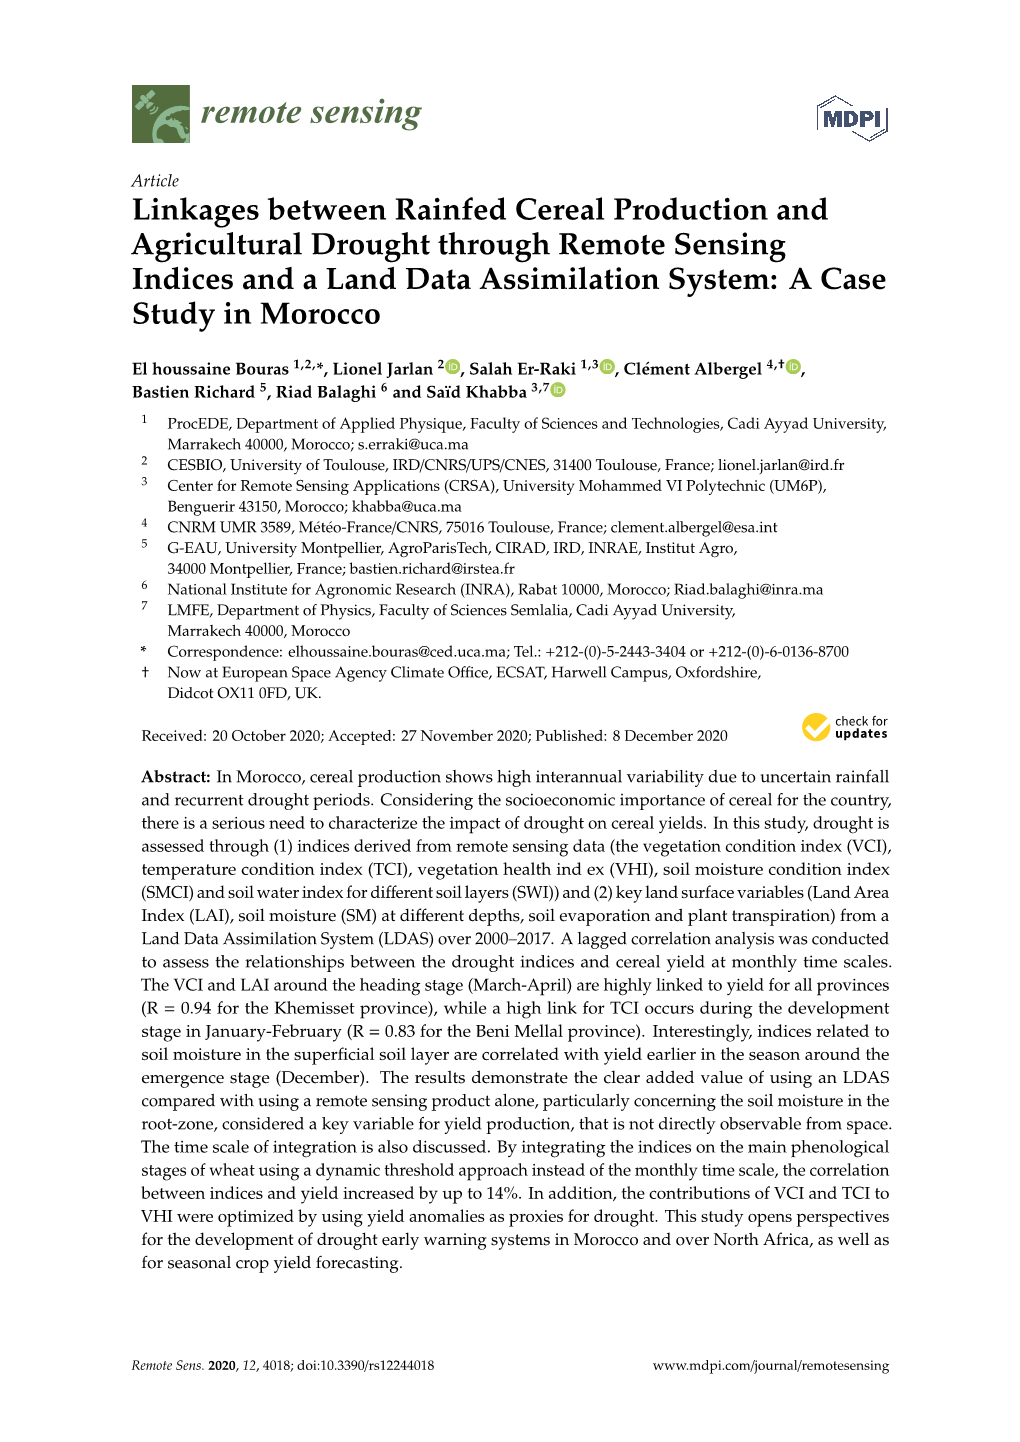 Linkages Between Rainfed Cereal Production and Agricultural Drought Through Remote Sensing Indices and a Land Data Assimilation System: a Case Study in Morocco